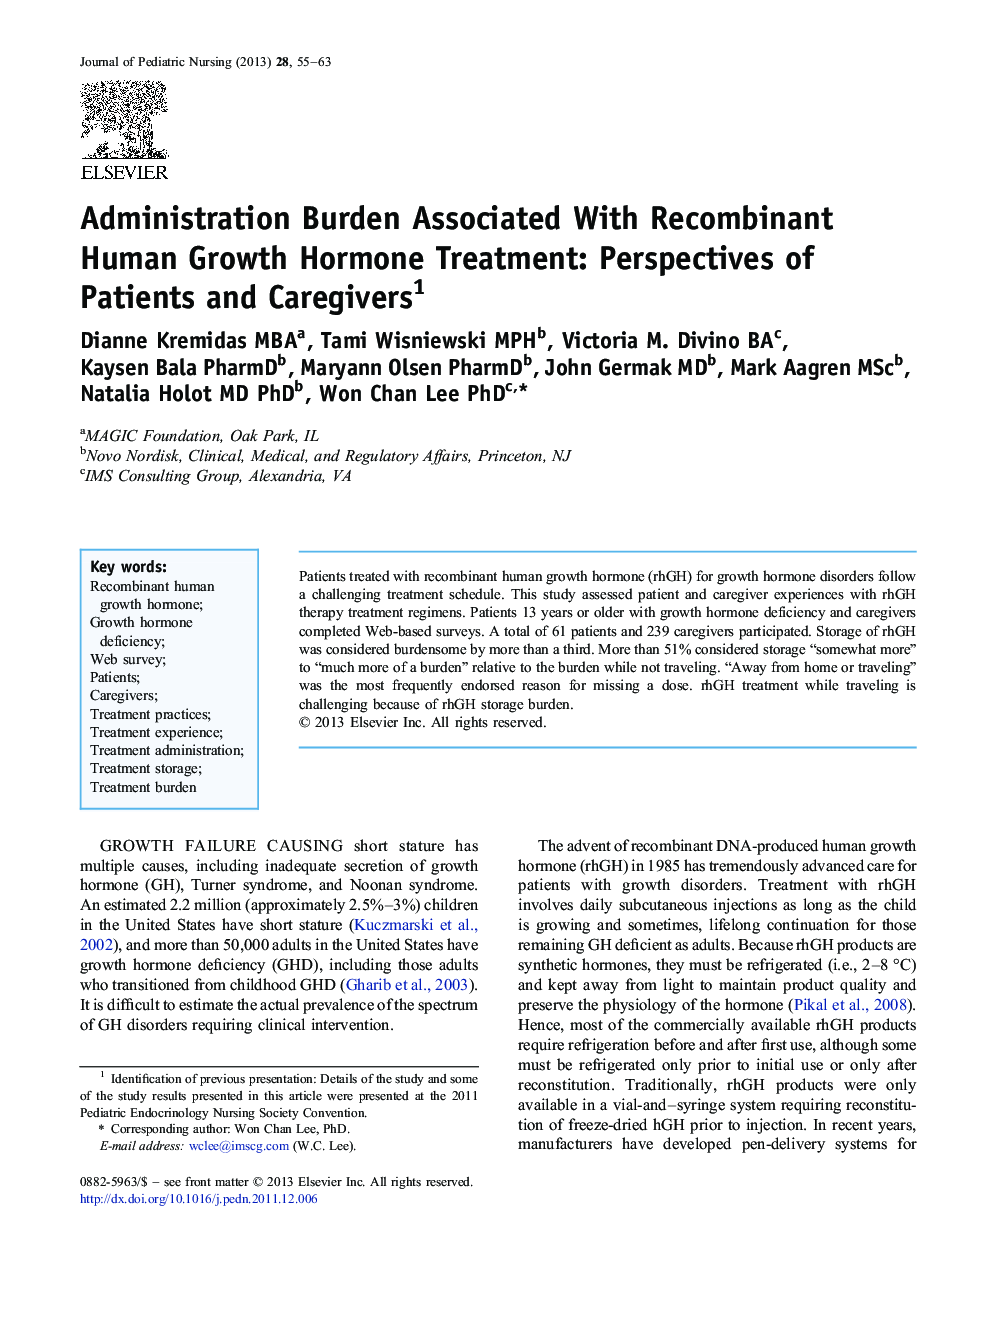 Administration Burden Associated With Recombinant Human Growth Hormone Treatment: Perspectives of Patients and Caregivers 1